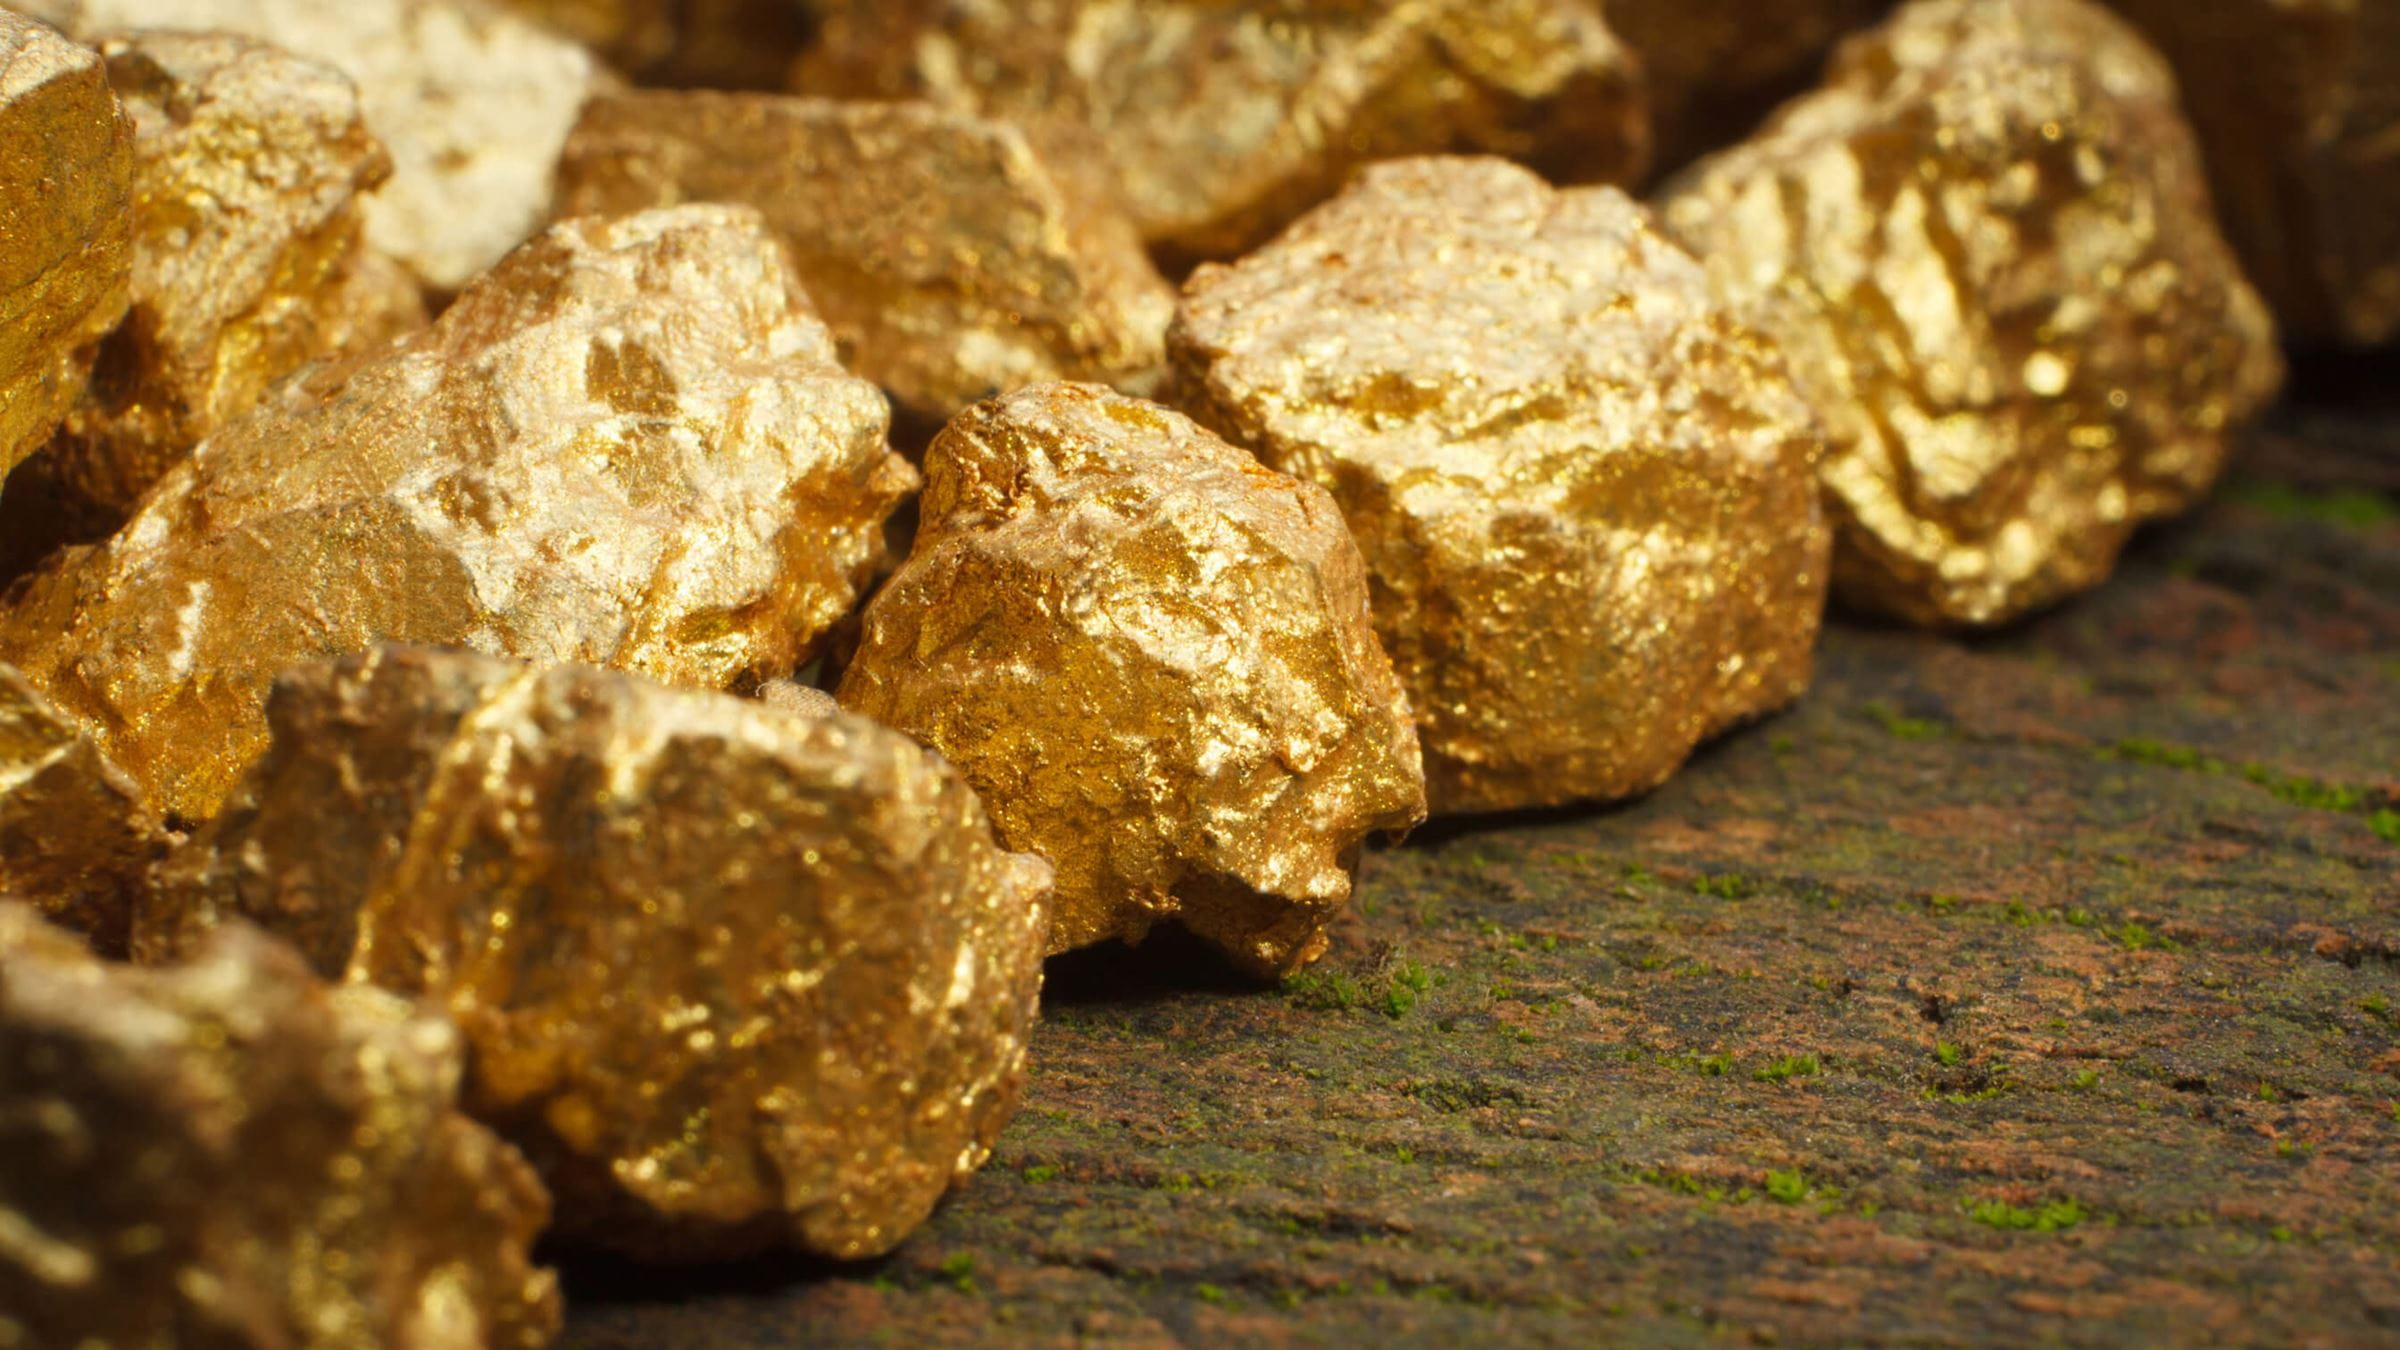 Pile of large gold nuggets